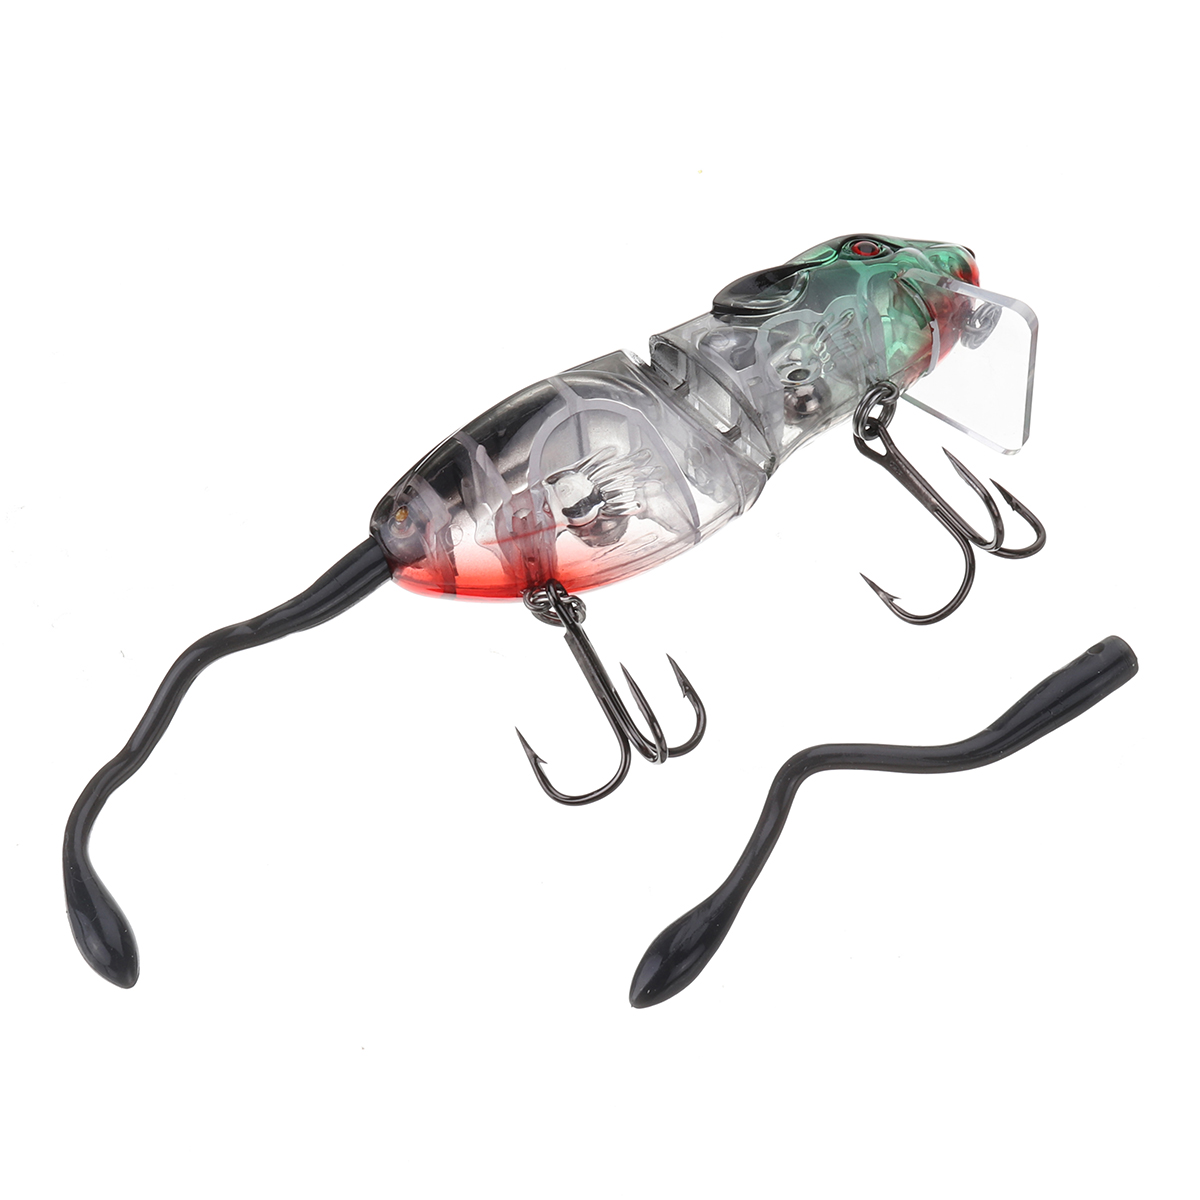 ZANLURE-1PC-16CM-45g-3D-Eyes-Mice-Rat-Shape-Lure-Artificial-Fishing-Bait-With-2-Hooks-Fishing-Tackle-1646066-8